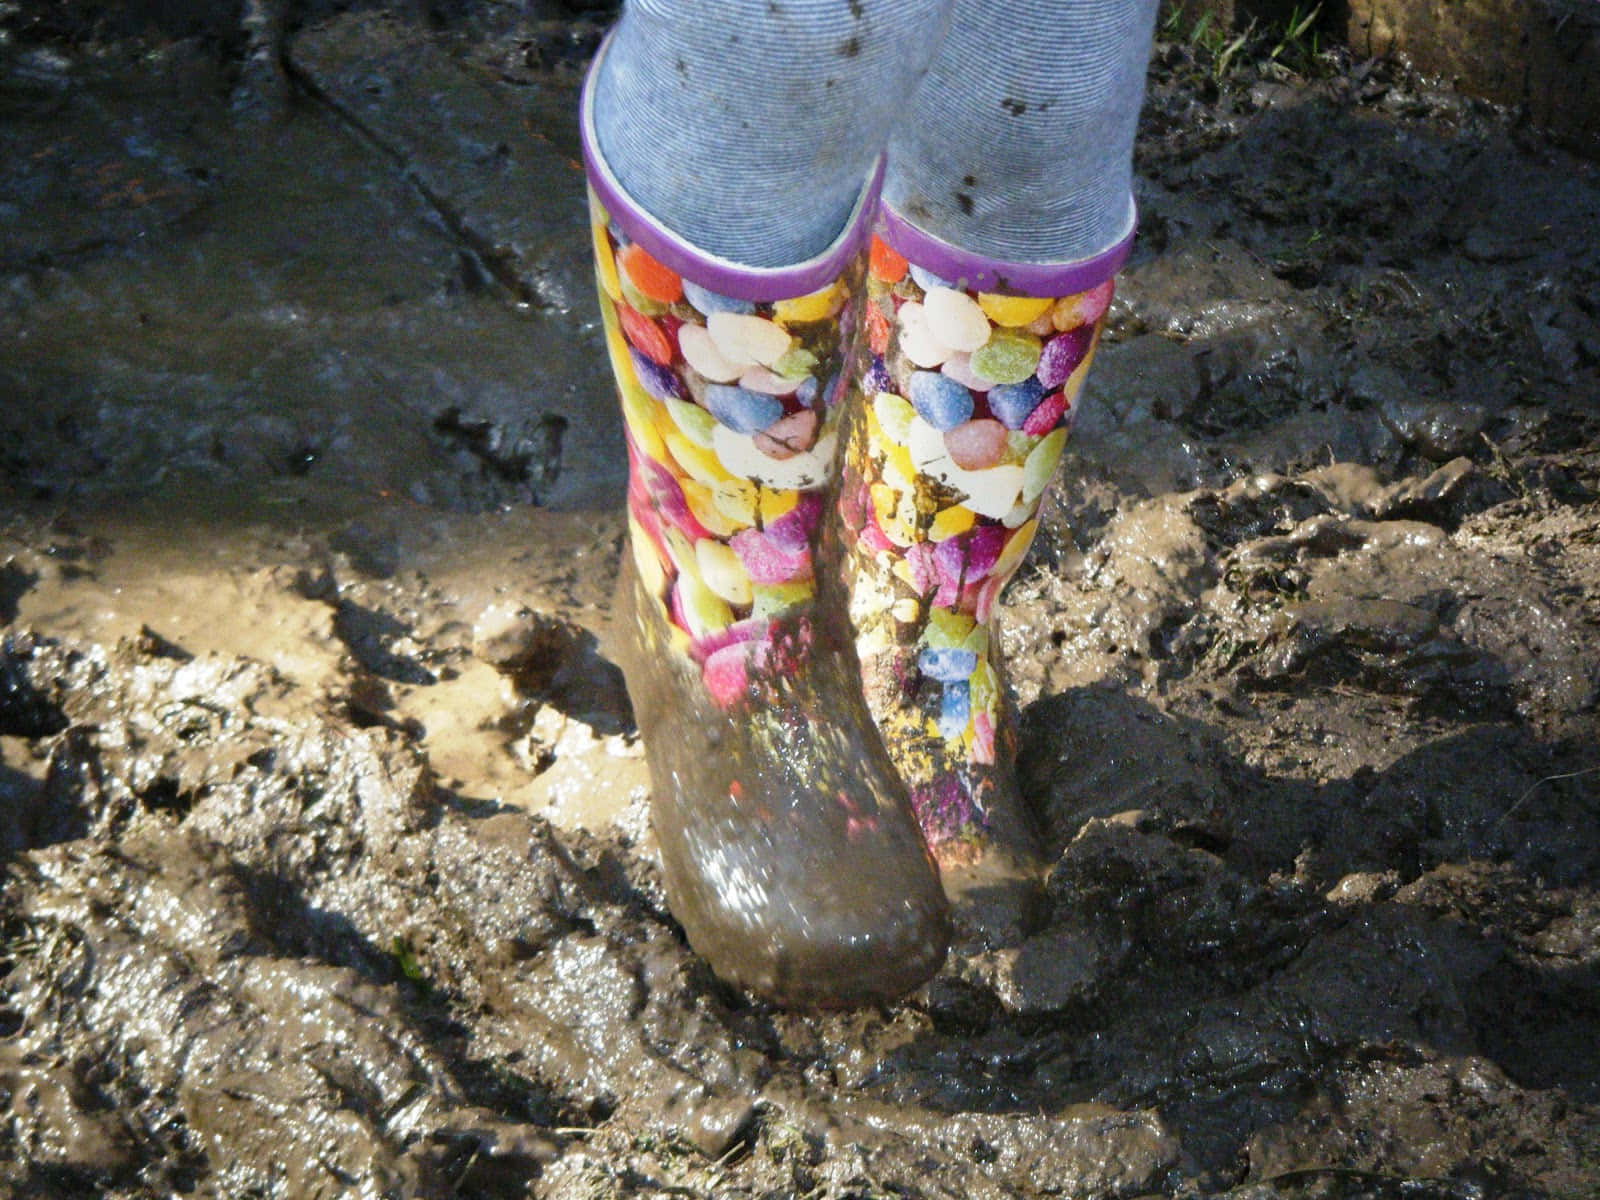 Get creative in the mud!